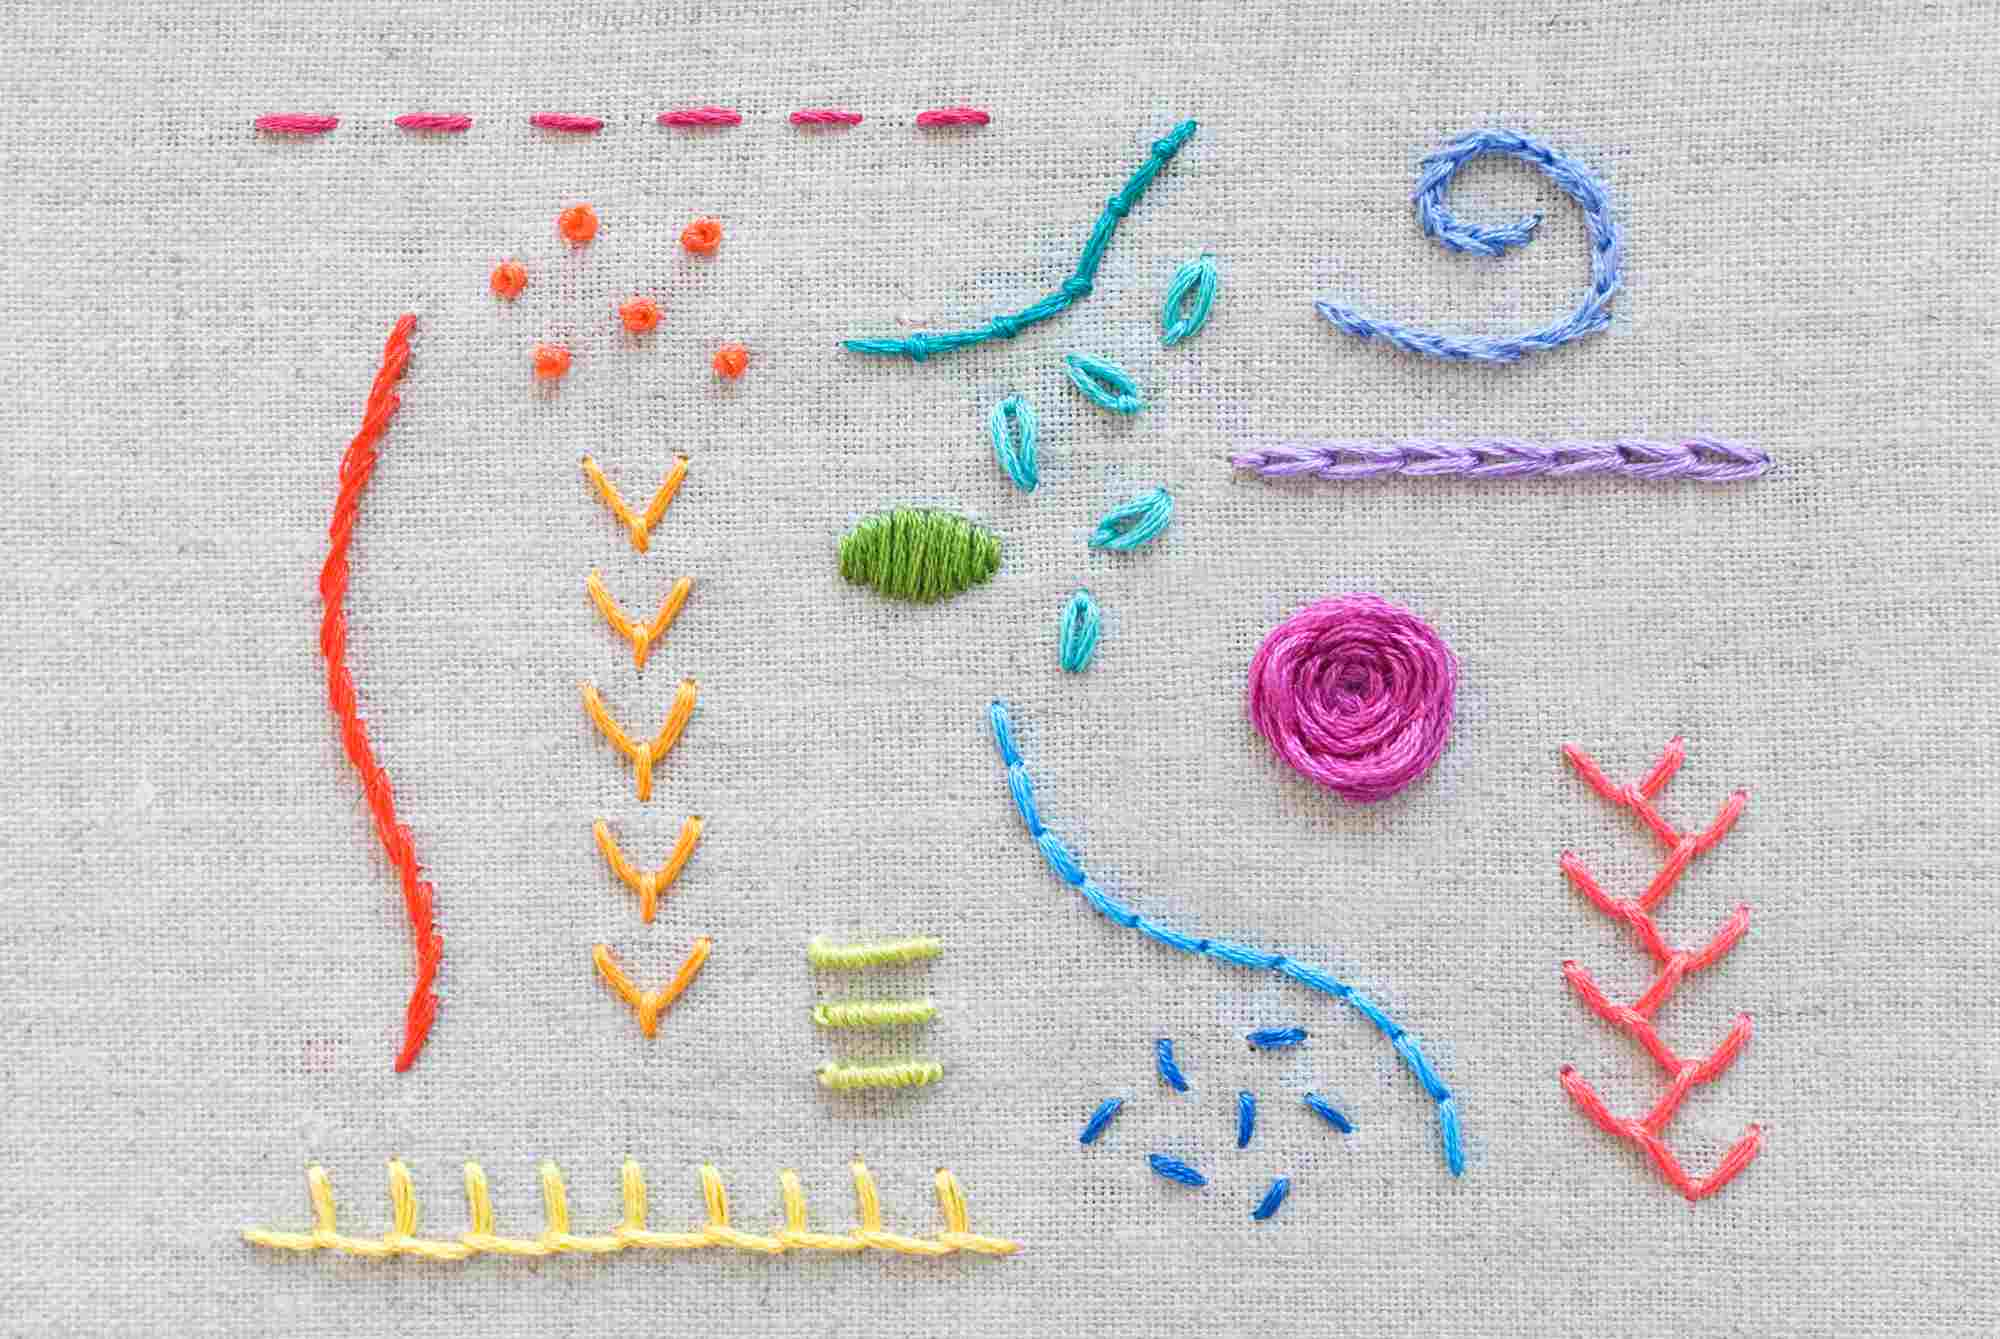 How To Make An Embroidery Pattern 15 Stitches Every Embroiderer Should Know